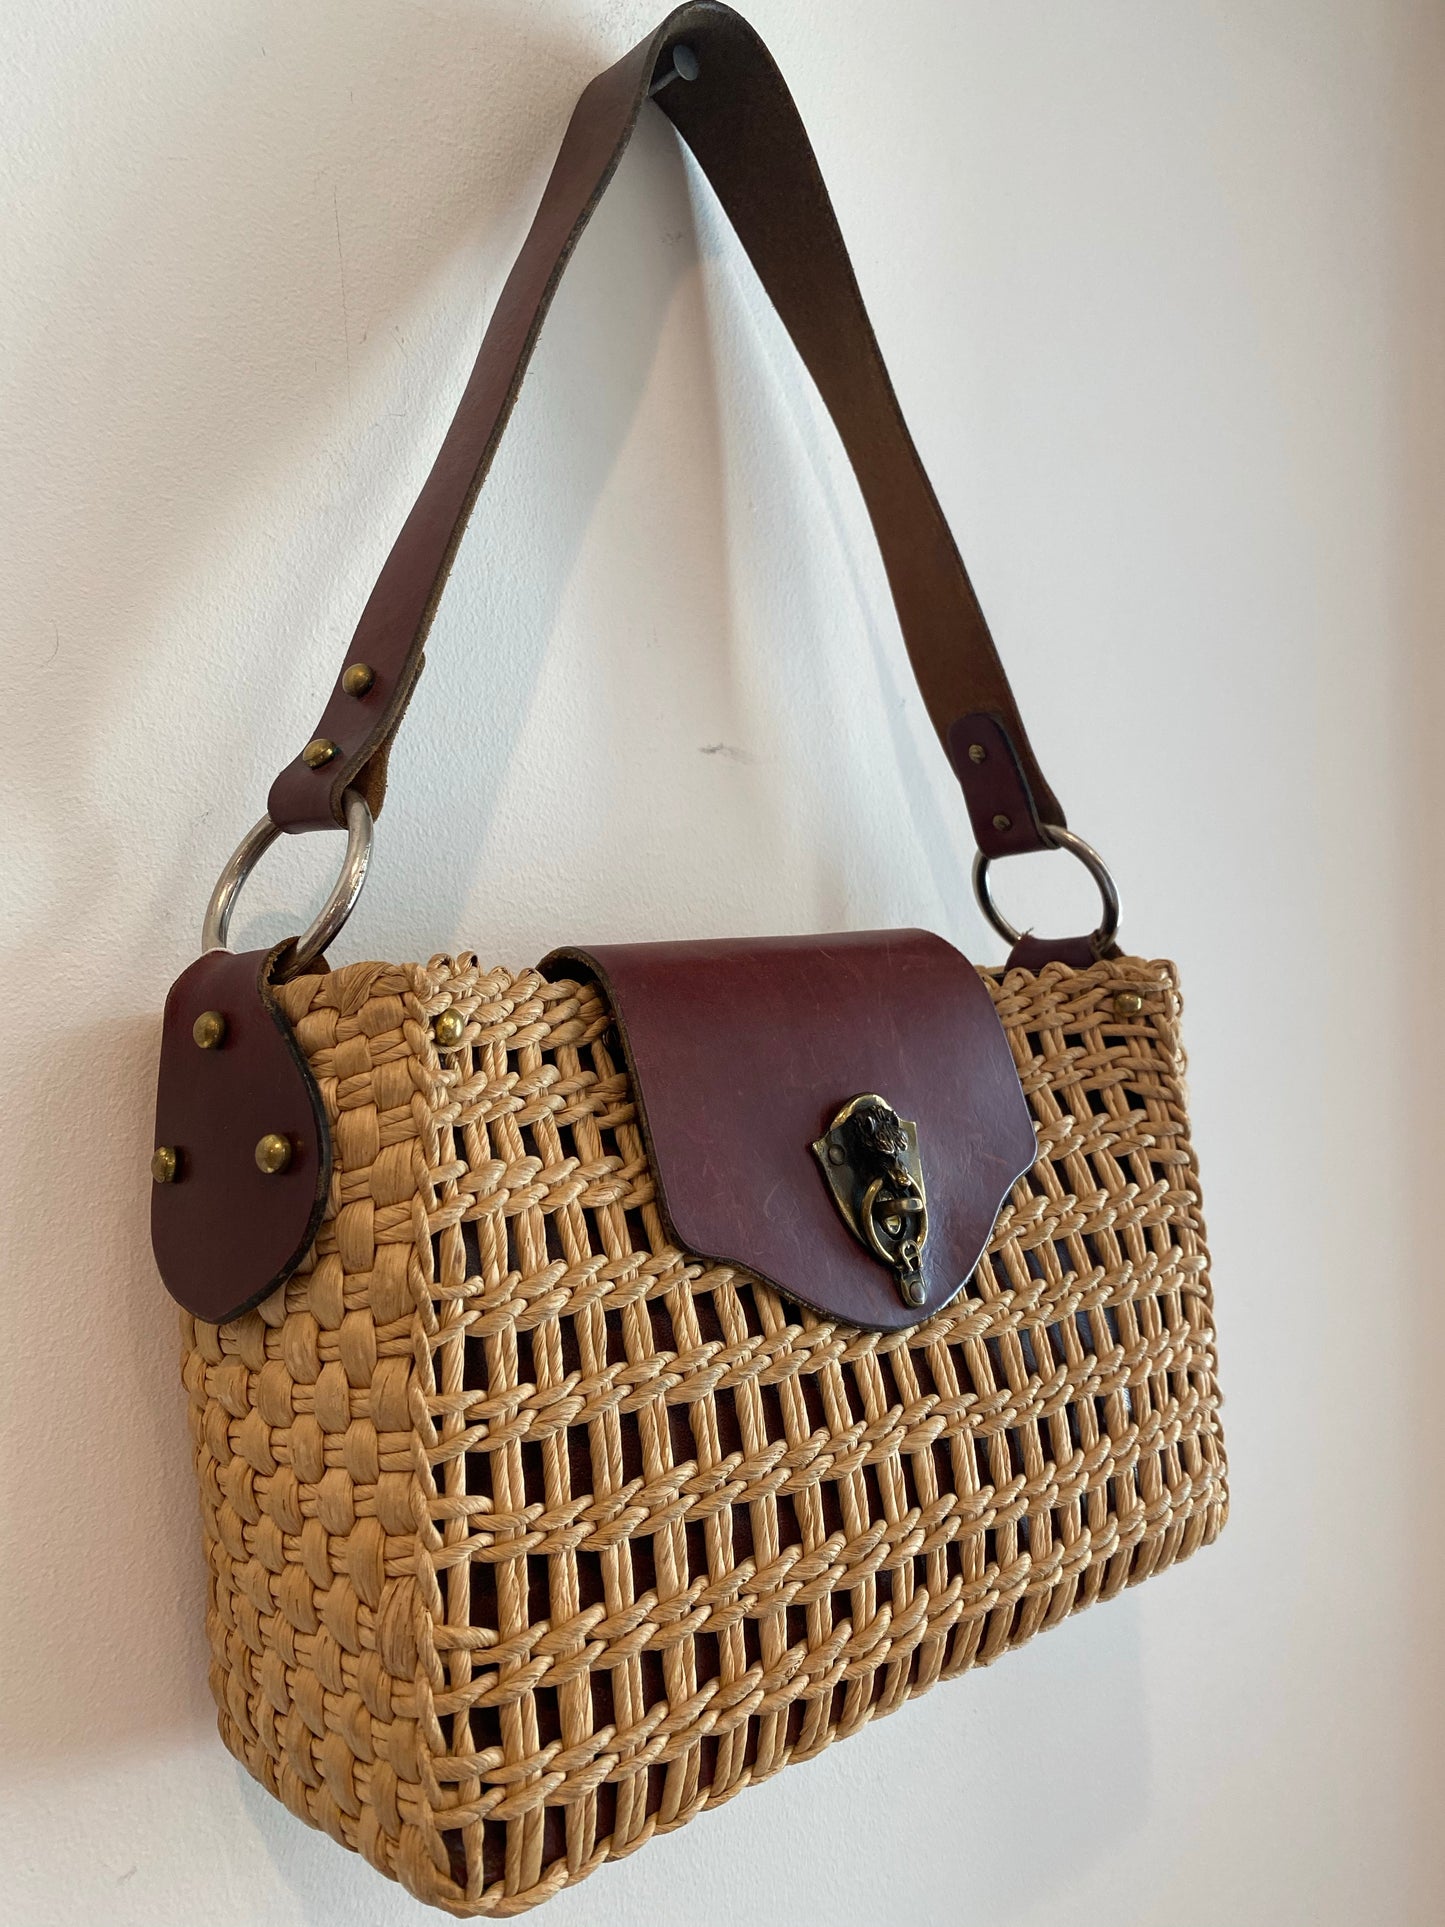 Wicker Handbag with Leather Details